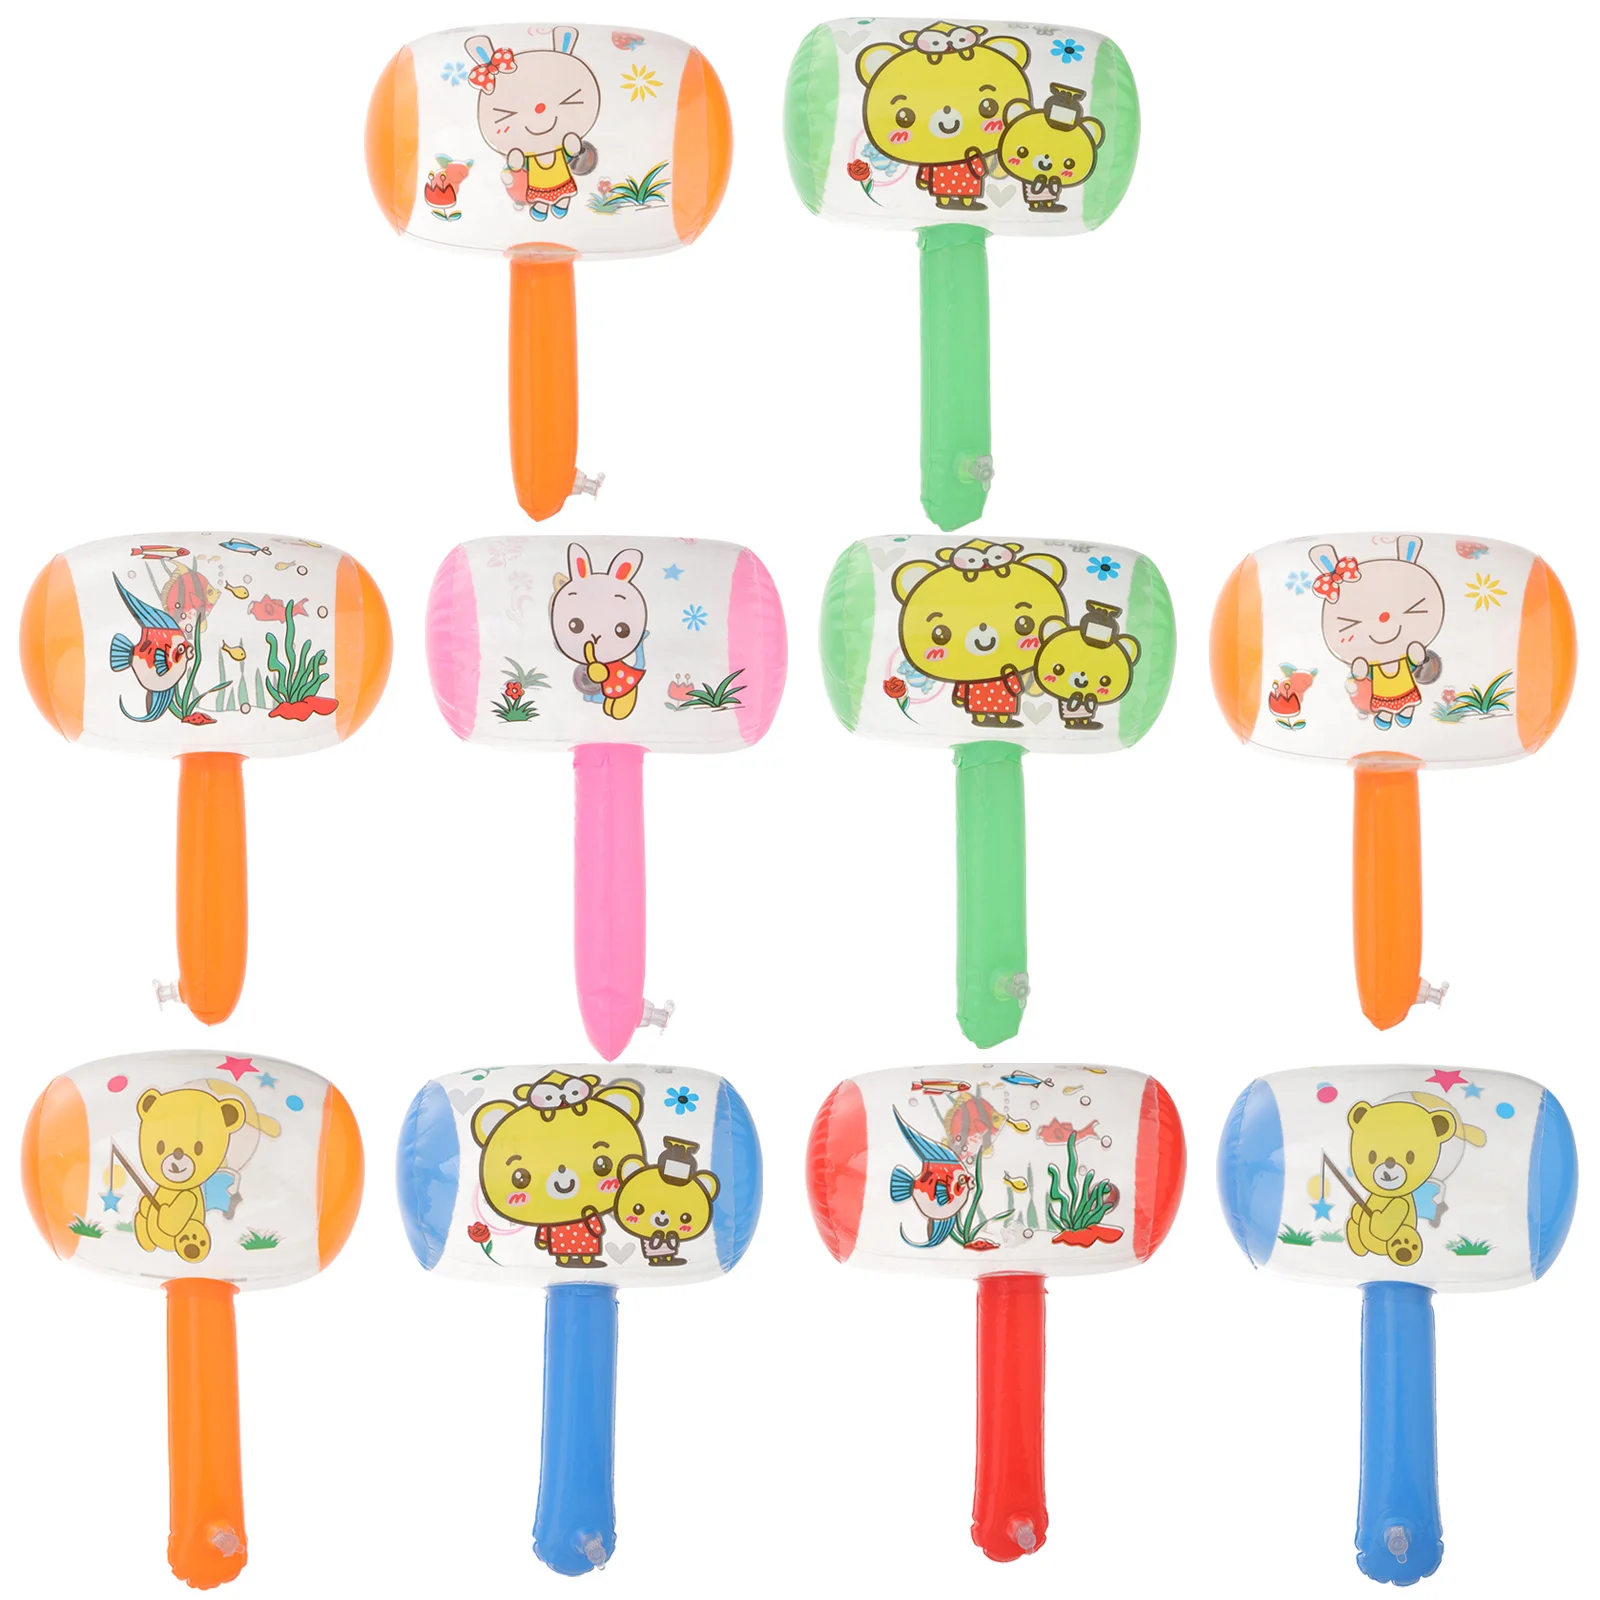 Toys Baby Hand Grip Toy Plastic Hammers Toys Kids Party Decorations  Construction Party Supplies Birthday Party Favors 5ps rainbow unicorn party rubber bangle bracelet birthday party decorations kids gift baby shower decorations event party favors